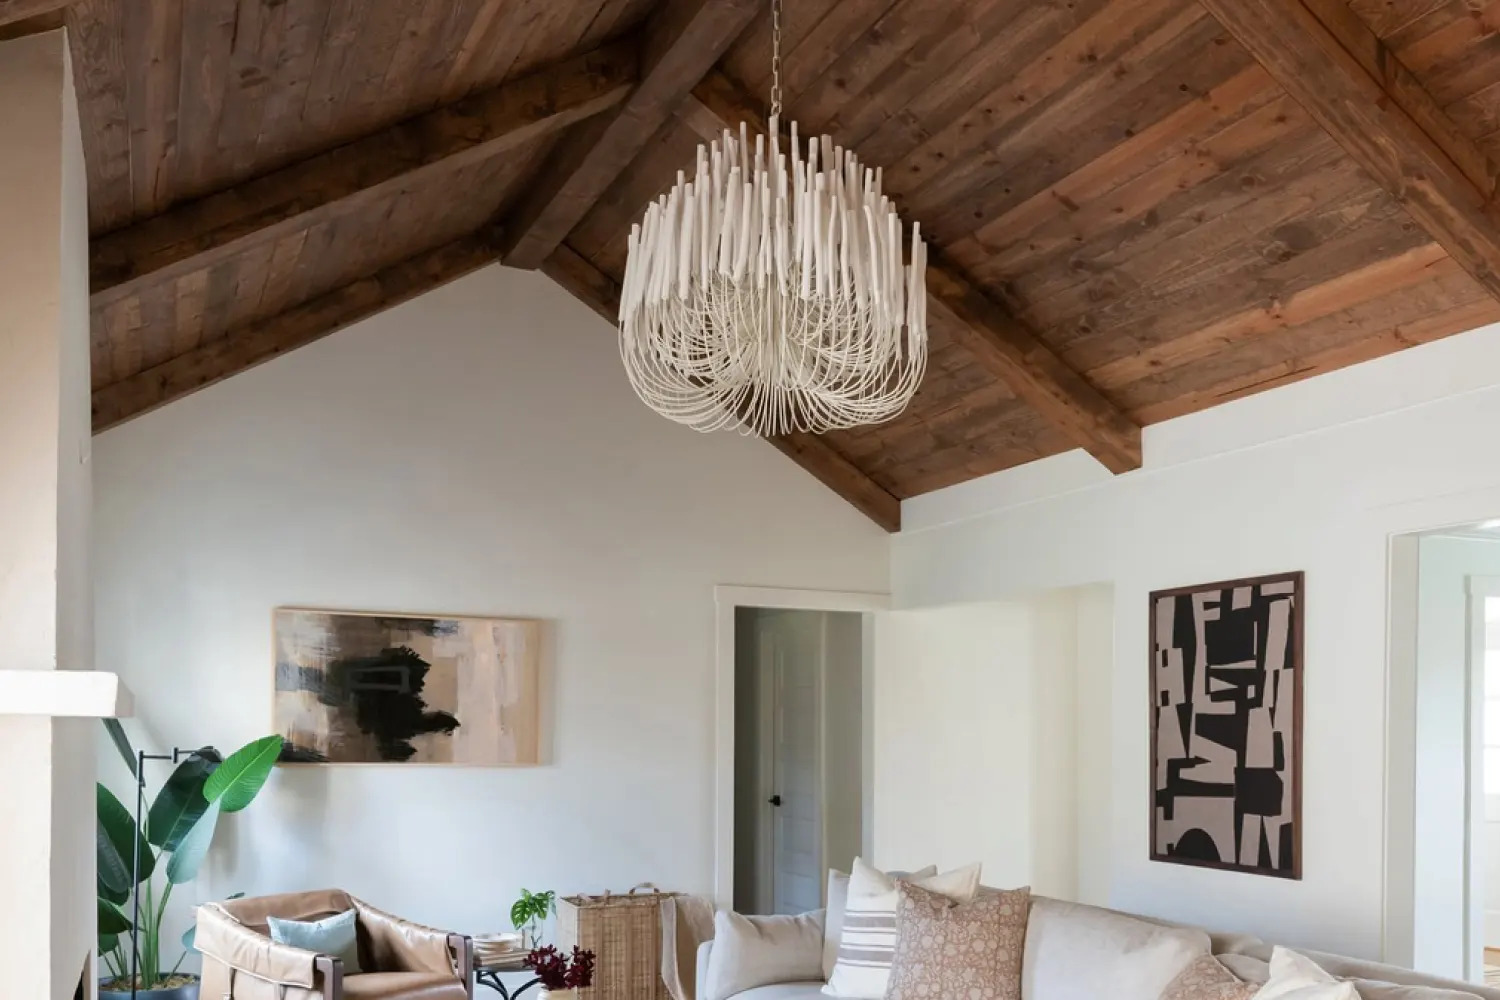 How Low To Hang A Chandelier In The Living Room